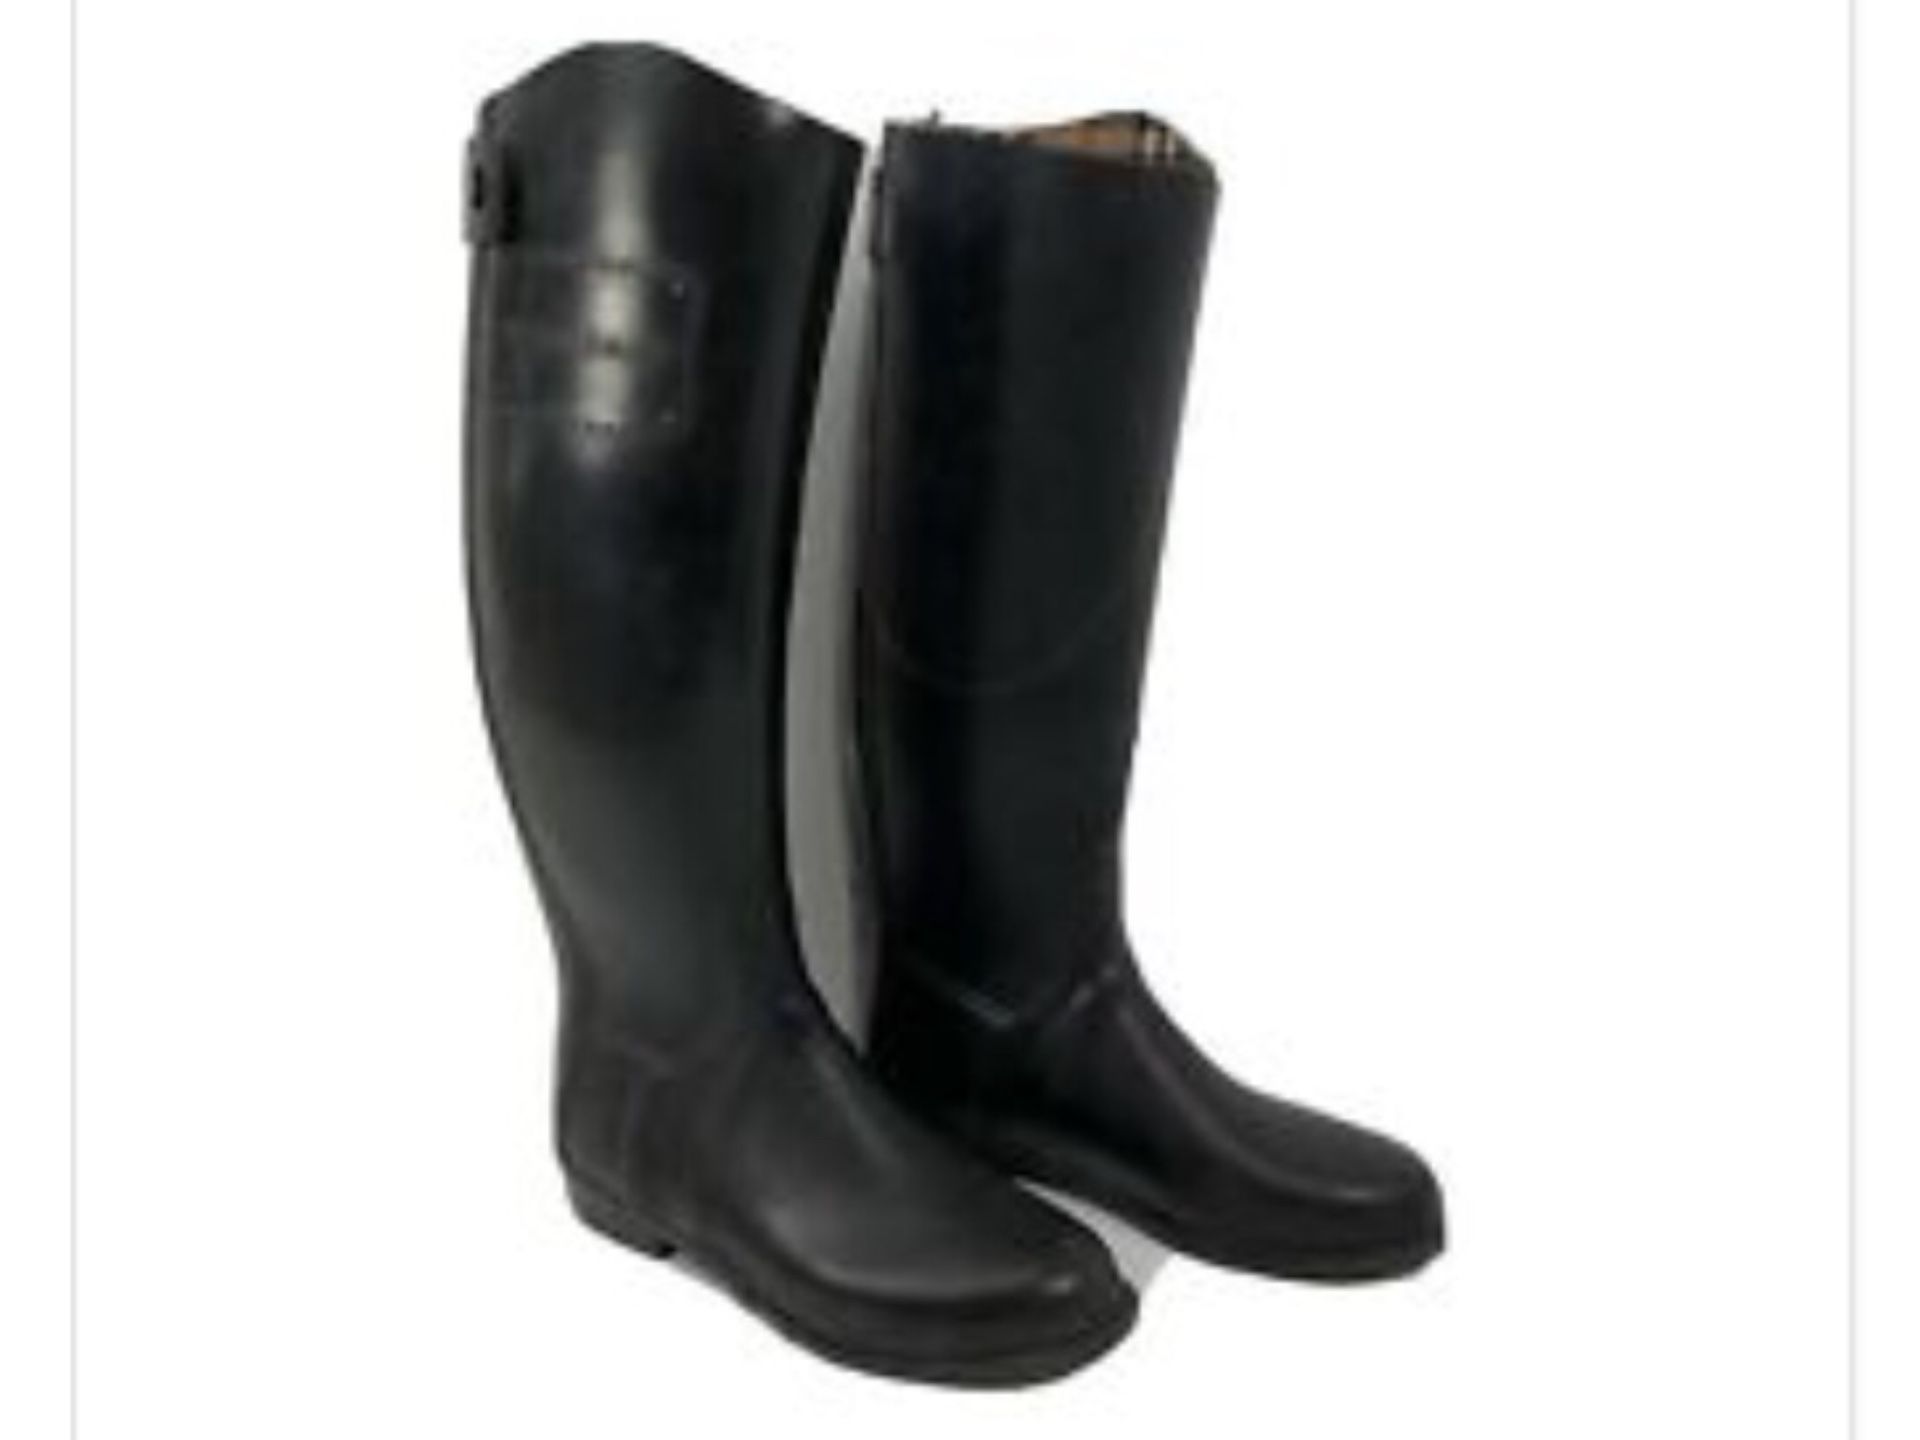 Burberry Women’s Black Rubber Belted Riding Rain boots Size 40 Size9